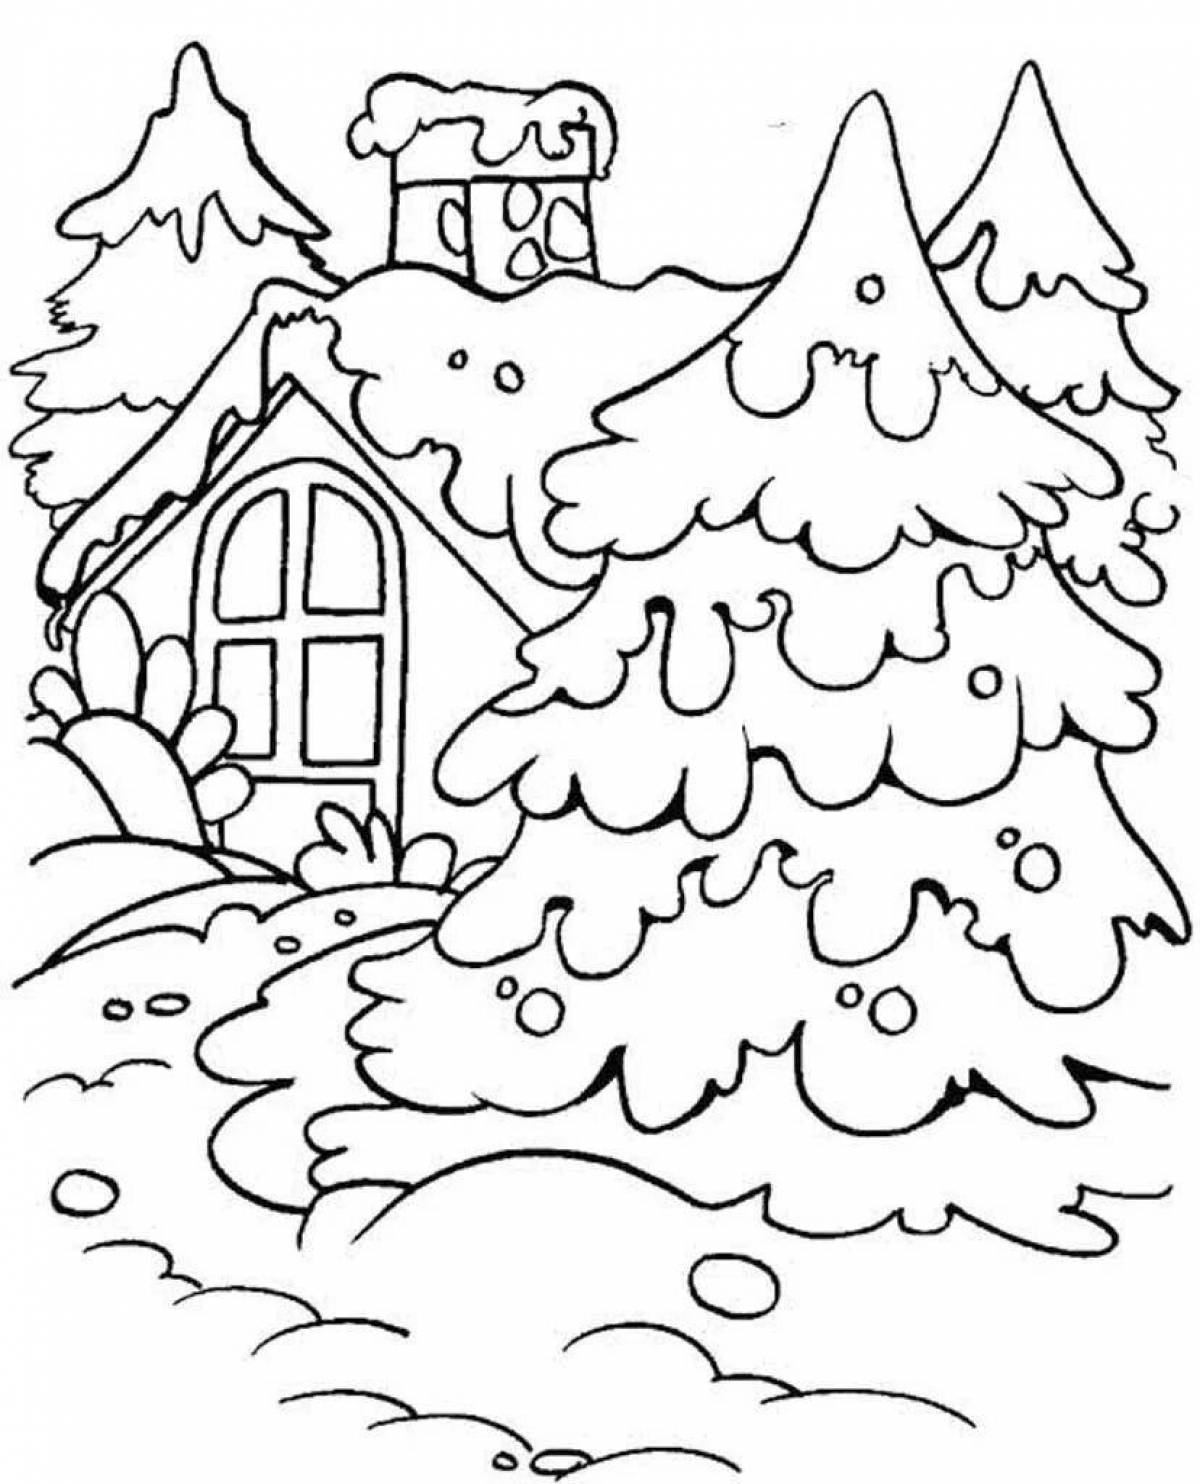 Glowing winter forest coloring book for kids